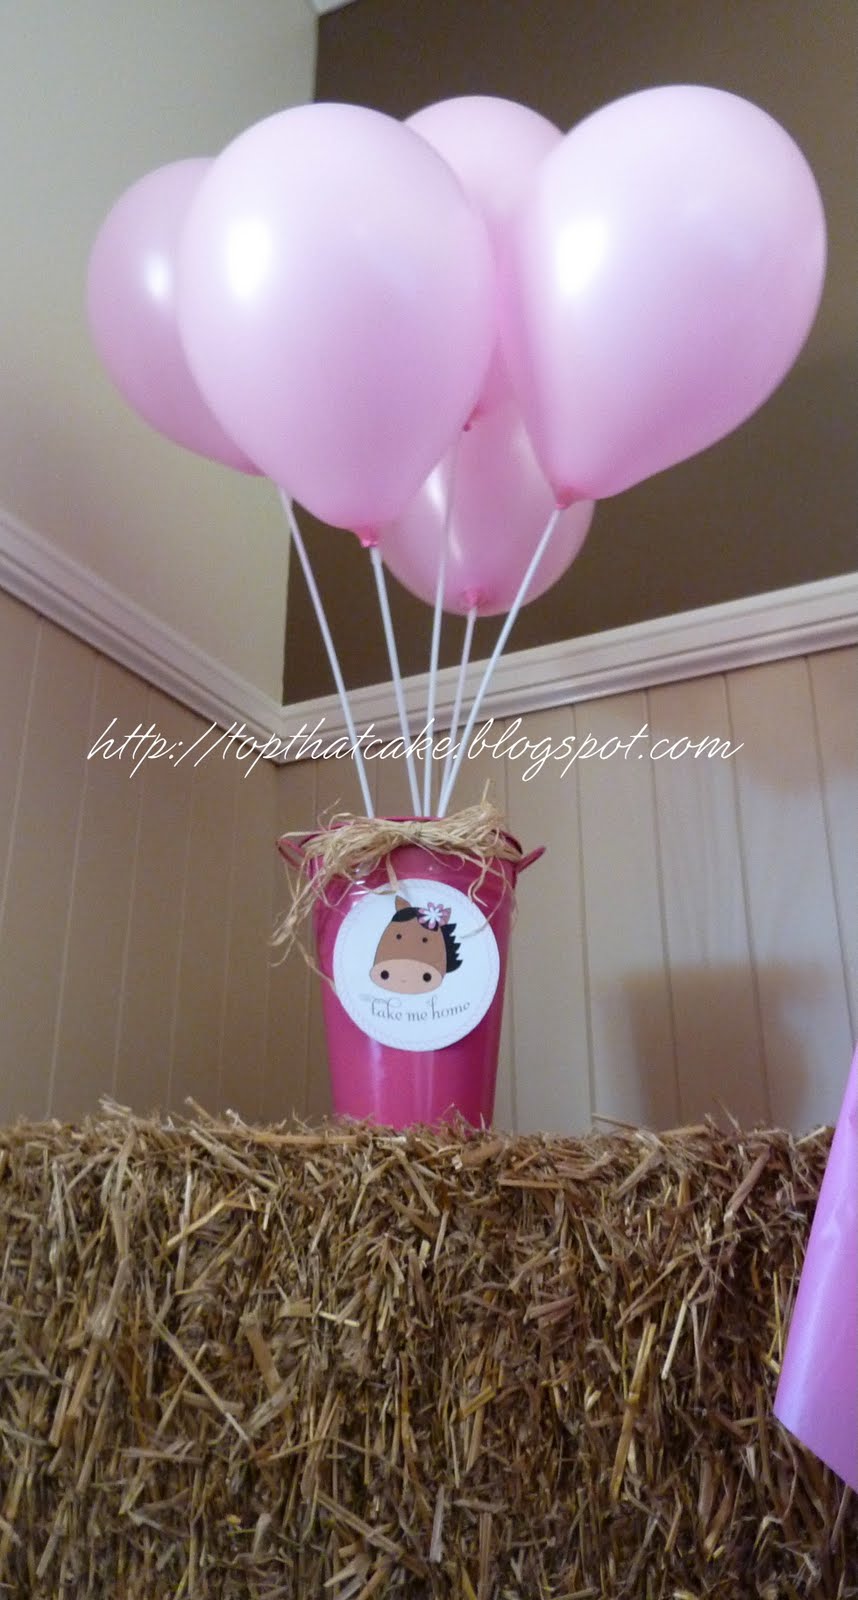 Top That!: Pink Pony Birthday Party! {and Pony Cake}